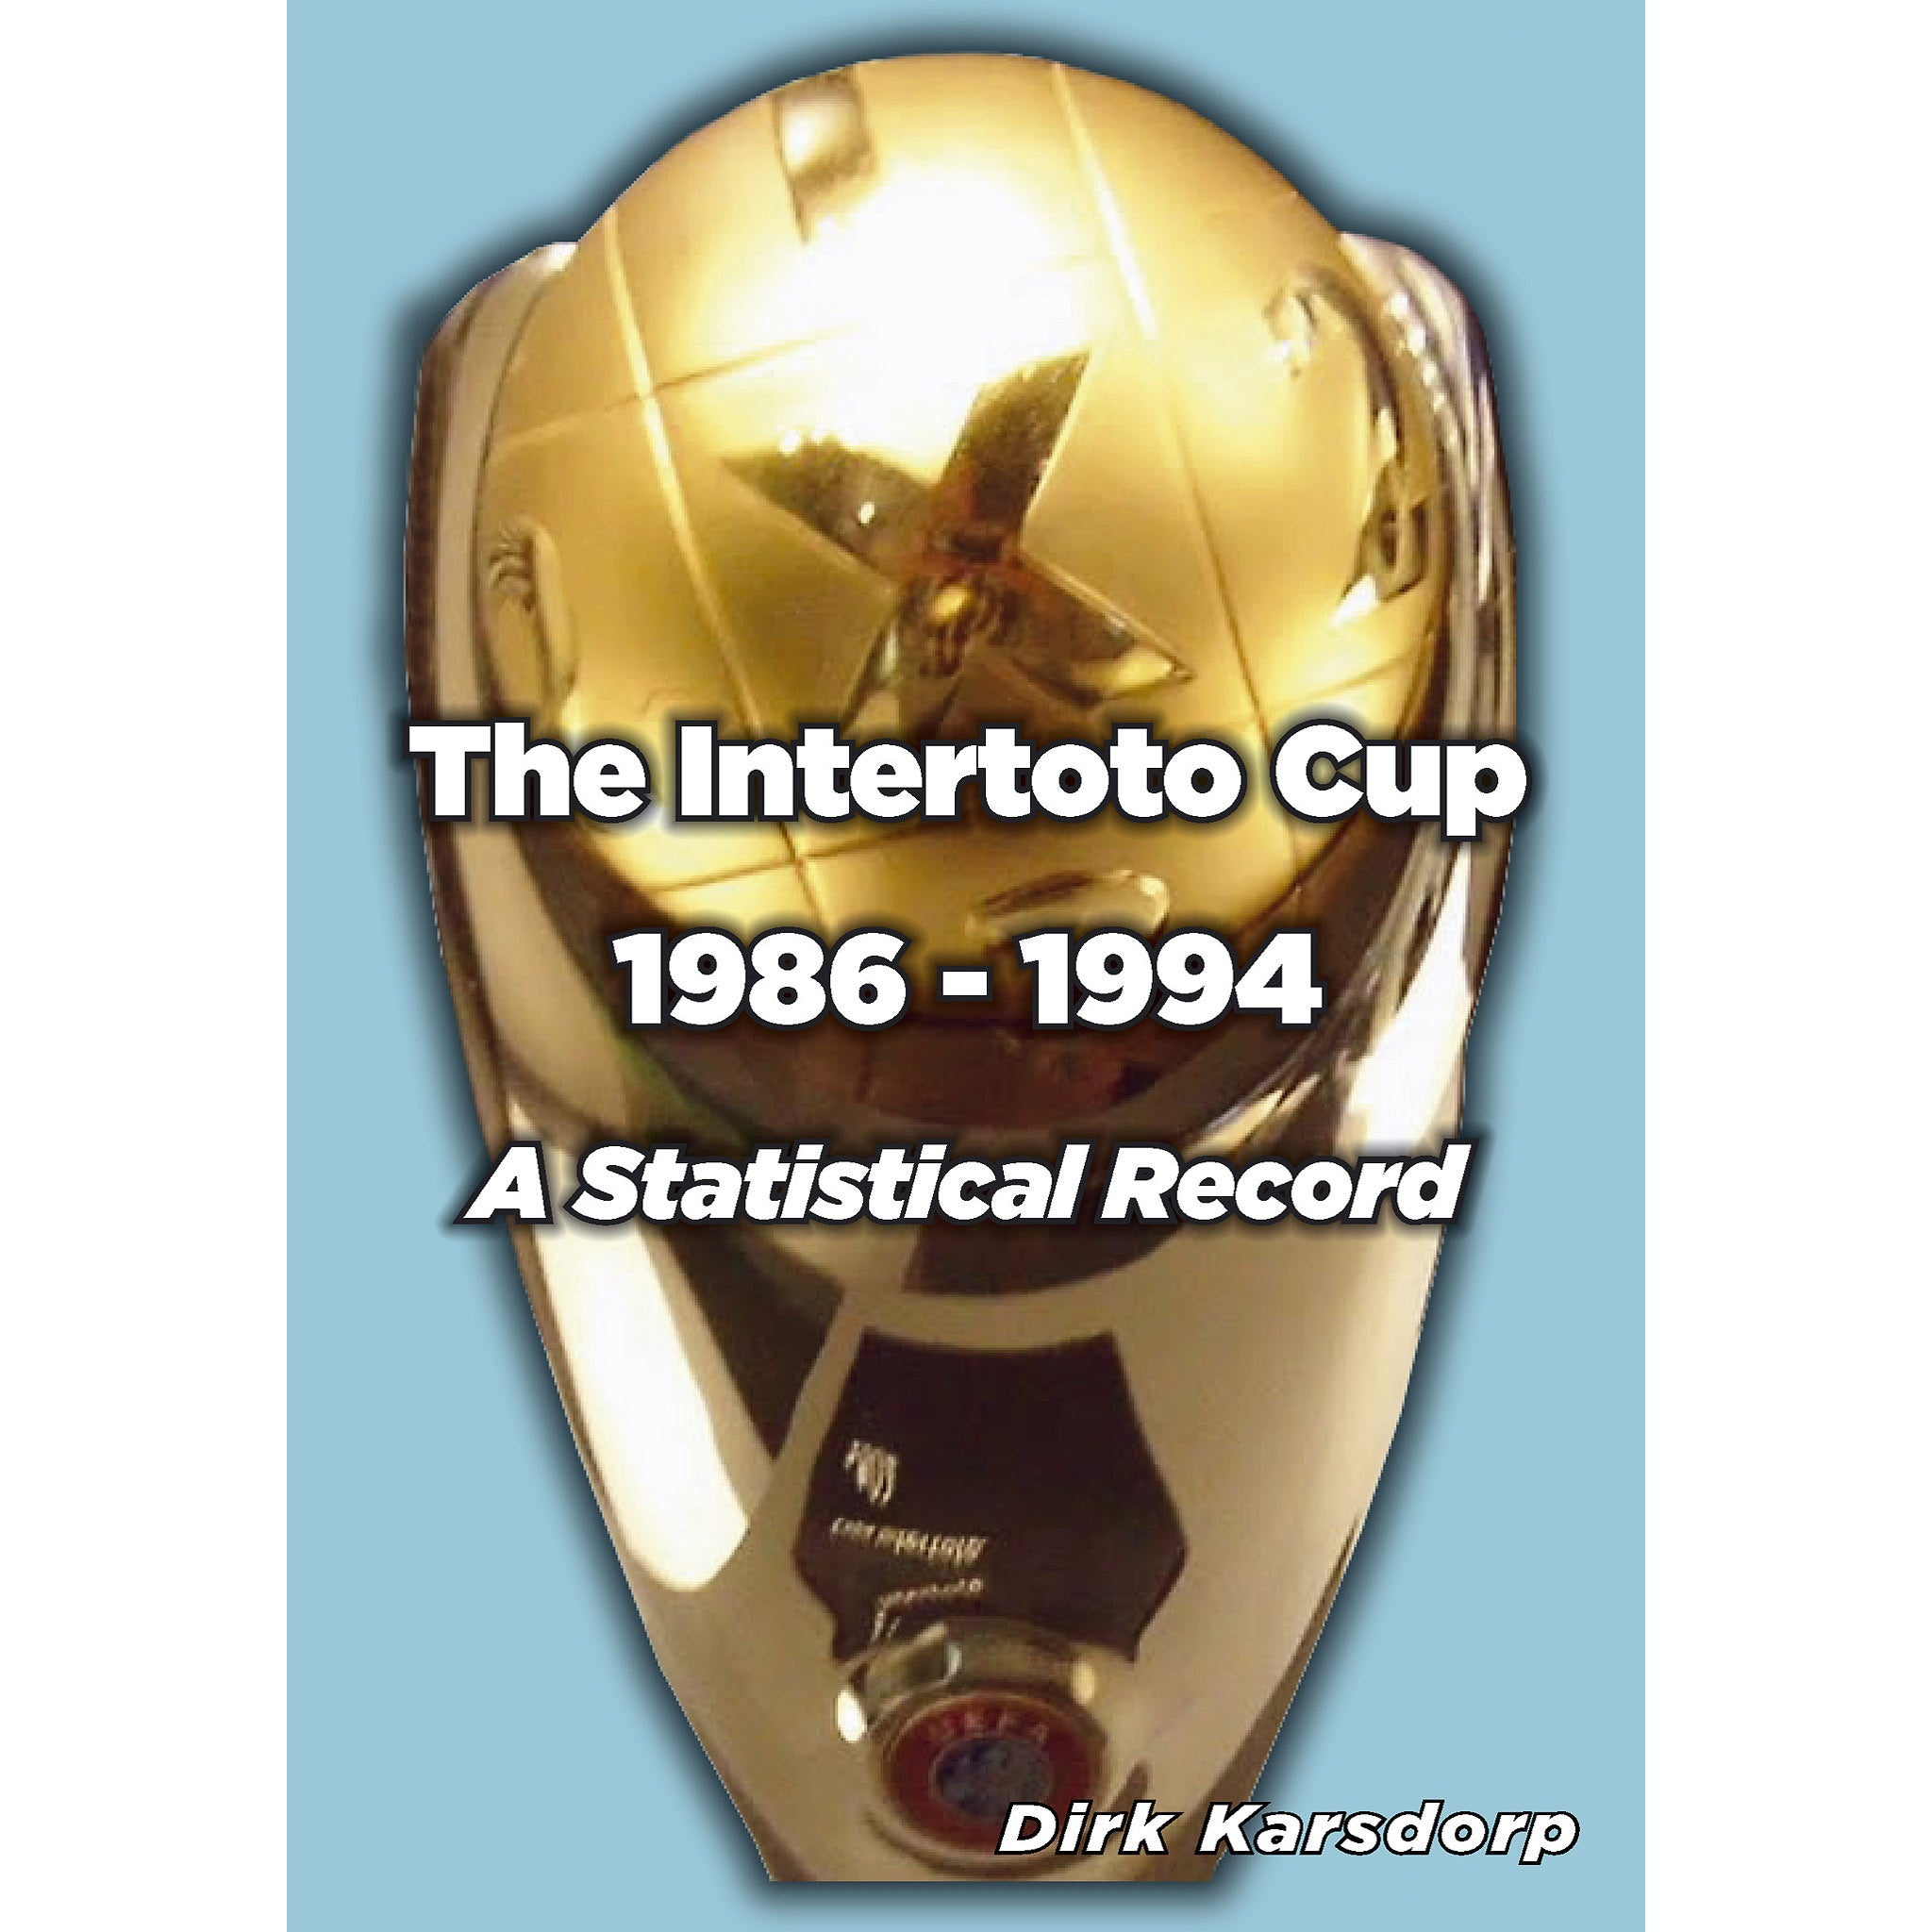 The Intertoto Cup – A Statistical Record 1986-1994